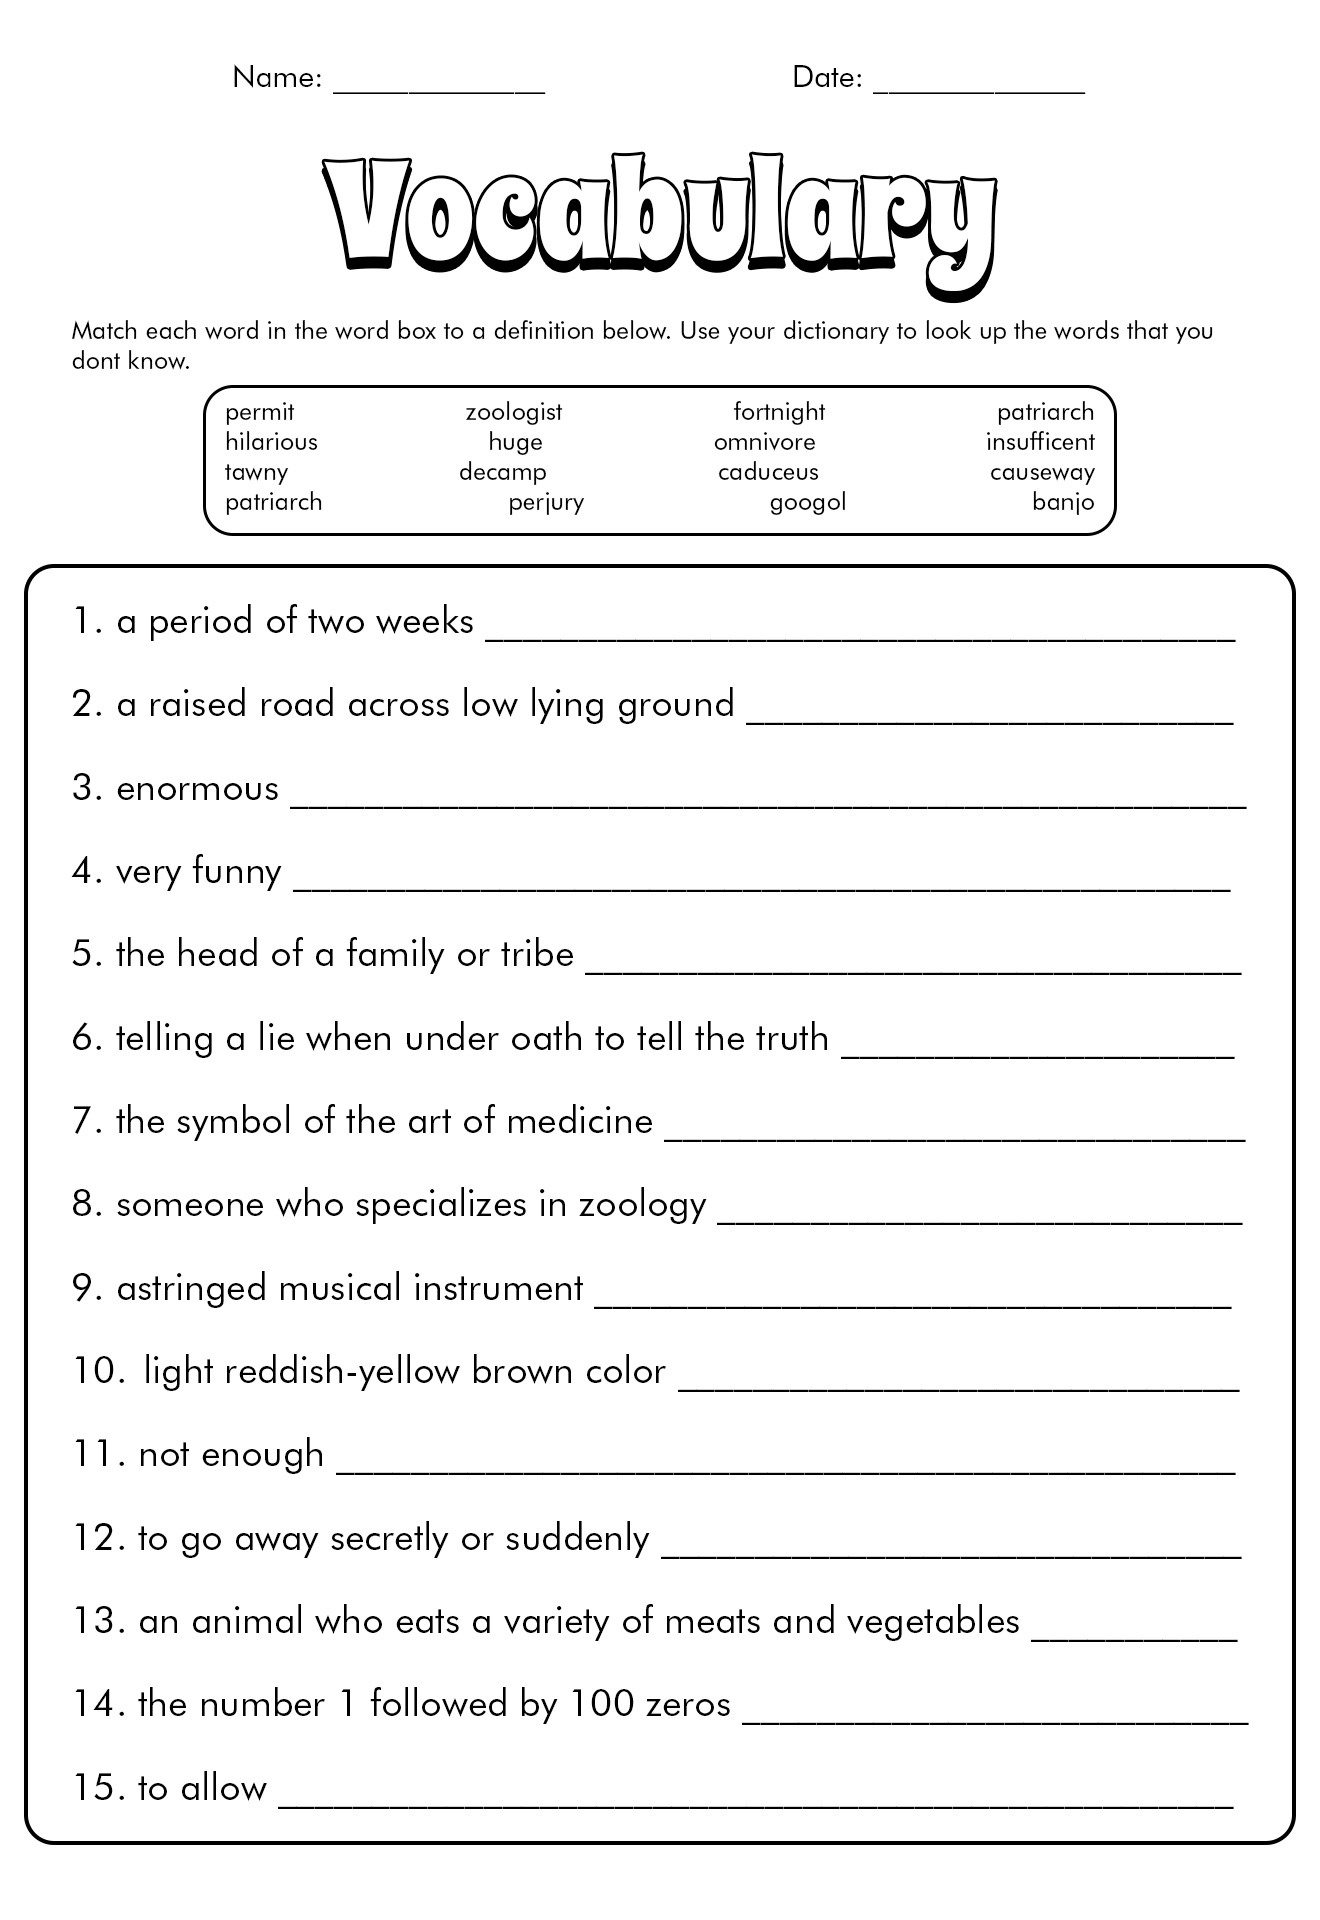 make-matching-worksheets-matching-worksheet-templates-with-regard-to-vocabulary-words